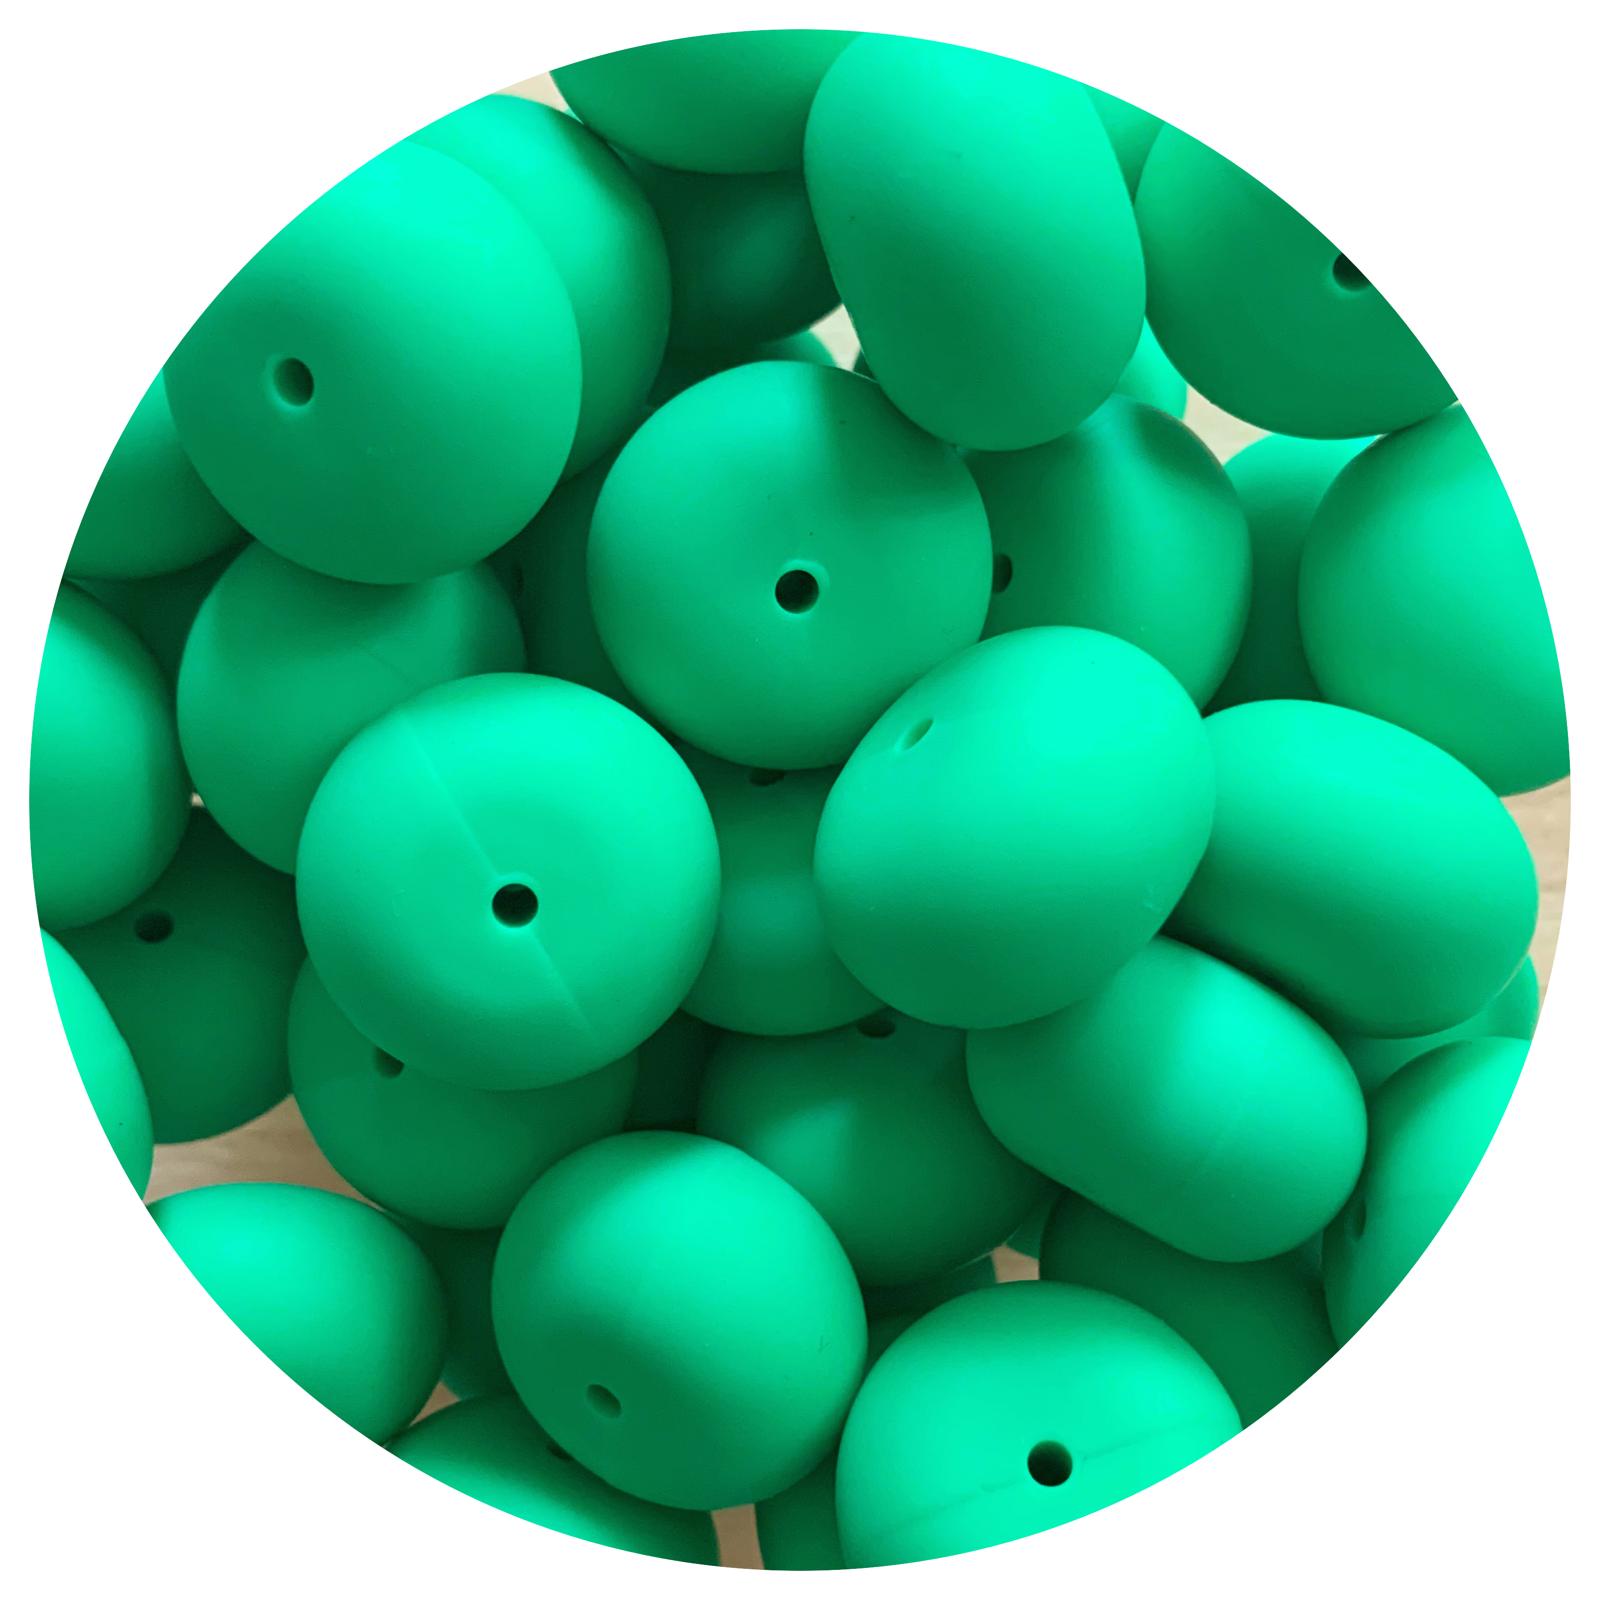 Kelly Green - 22mm Abacus Silicone Beads - 5 Beads